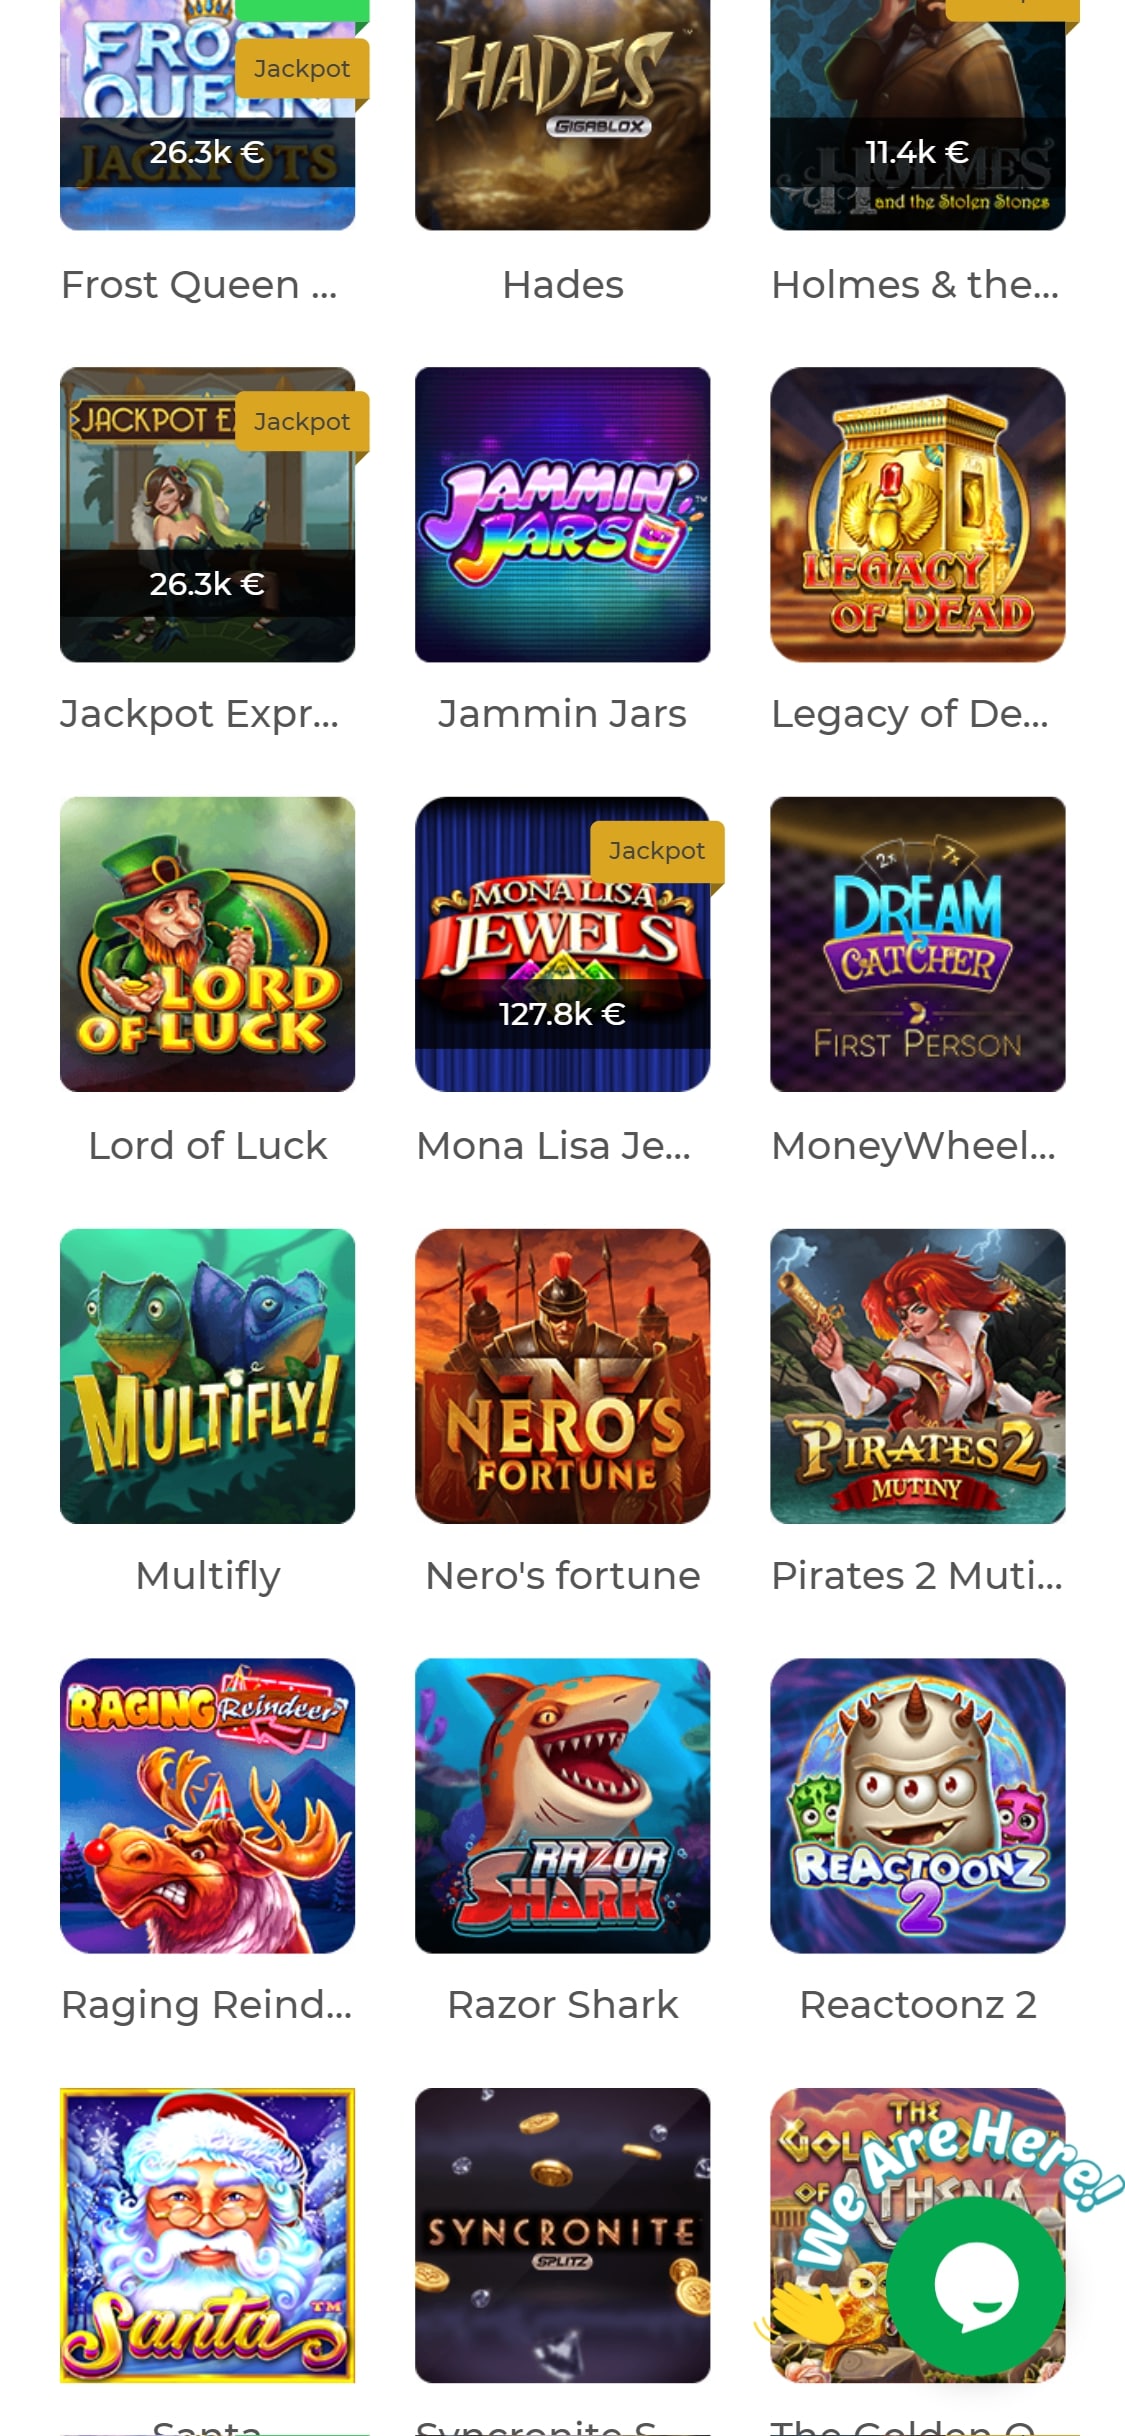 Wolfycasino Mobile Games Review